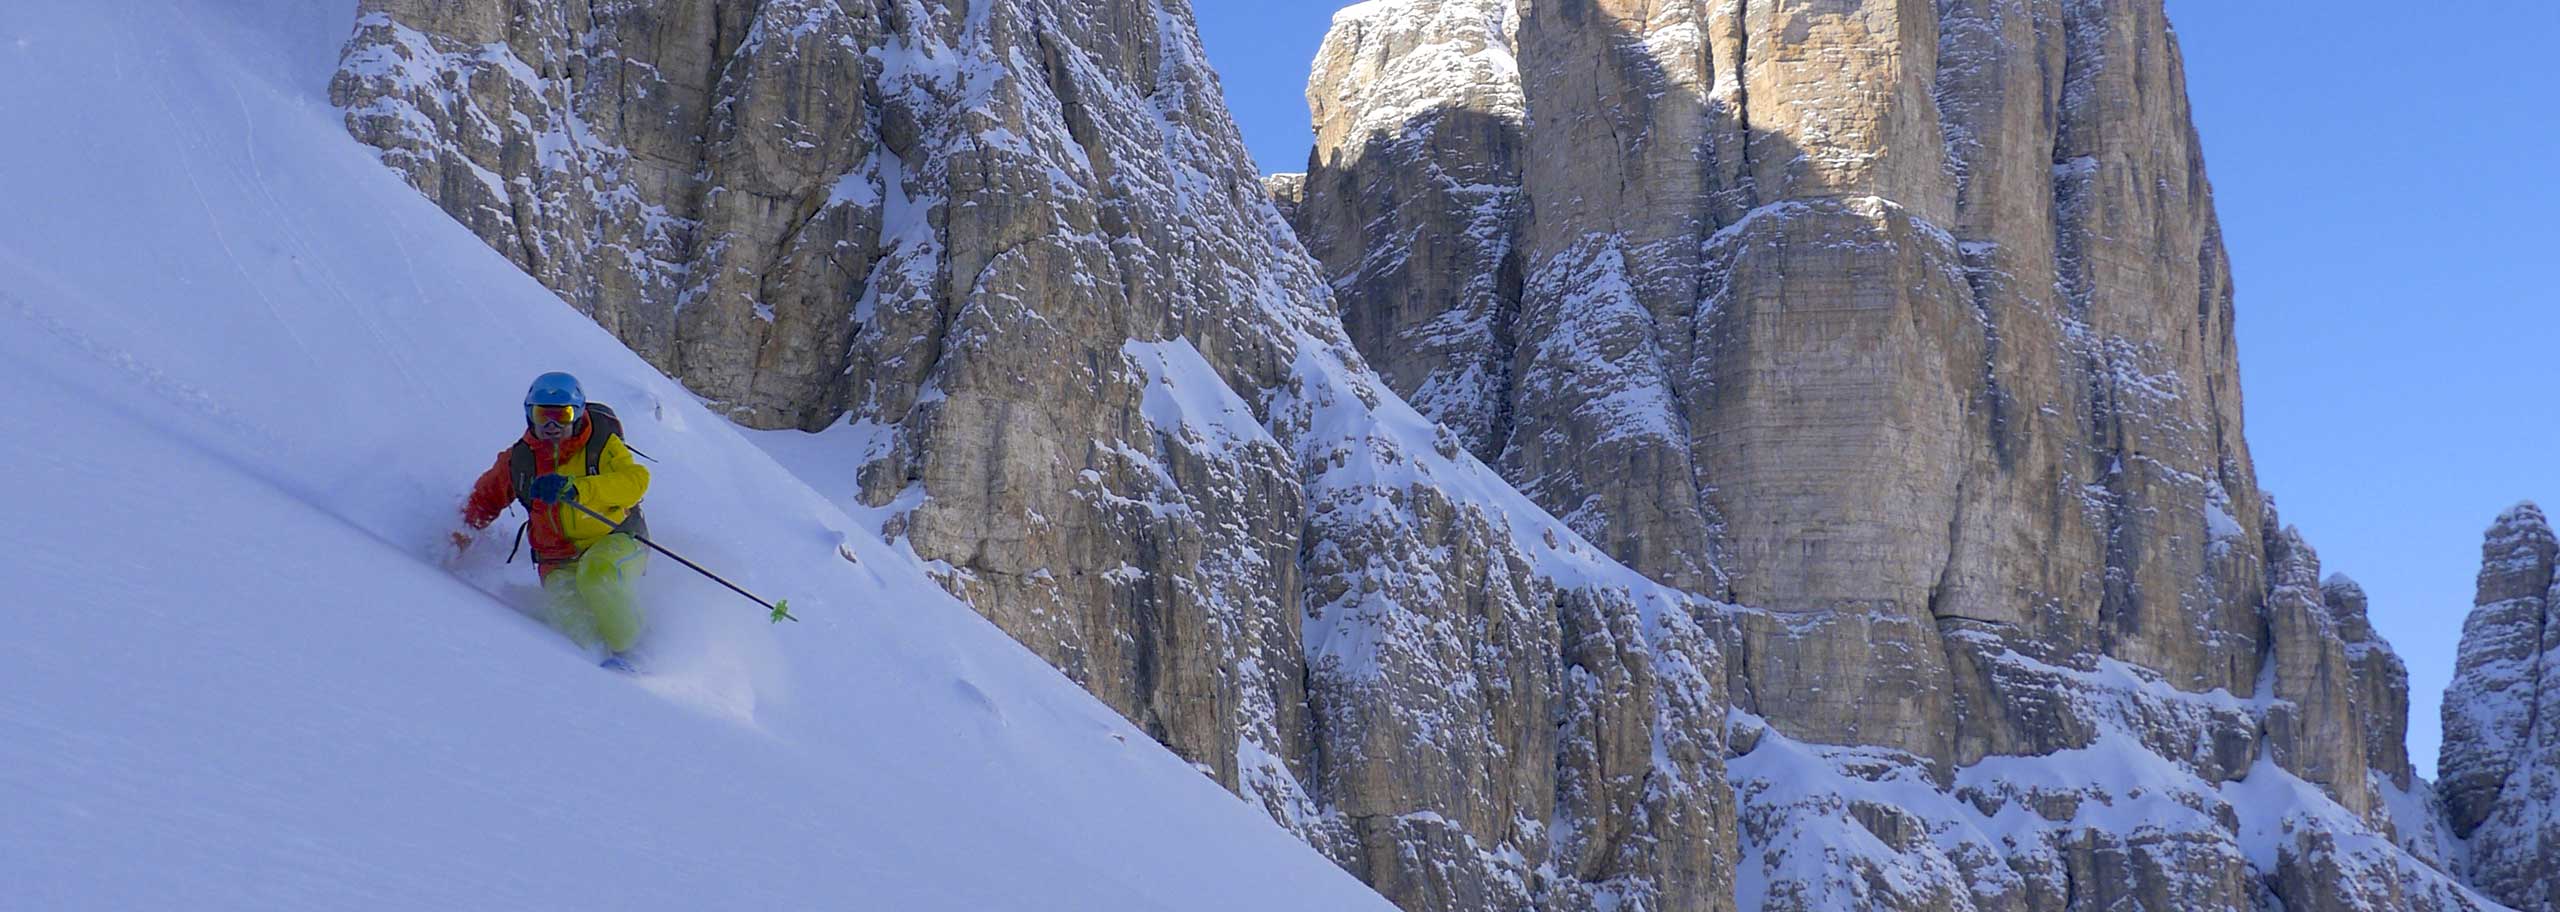 Off-piste Skiing with a Mountain Guide in Val di Fassa